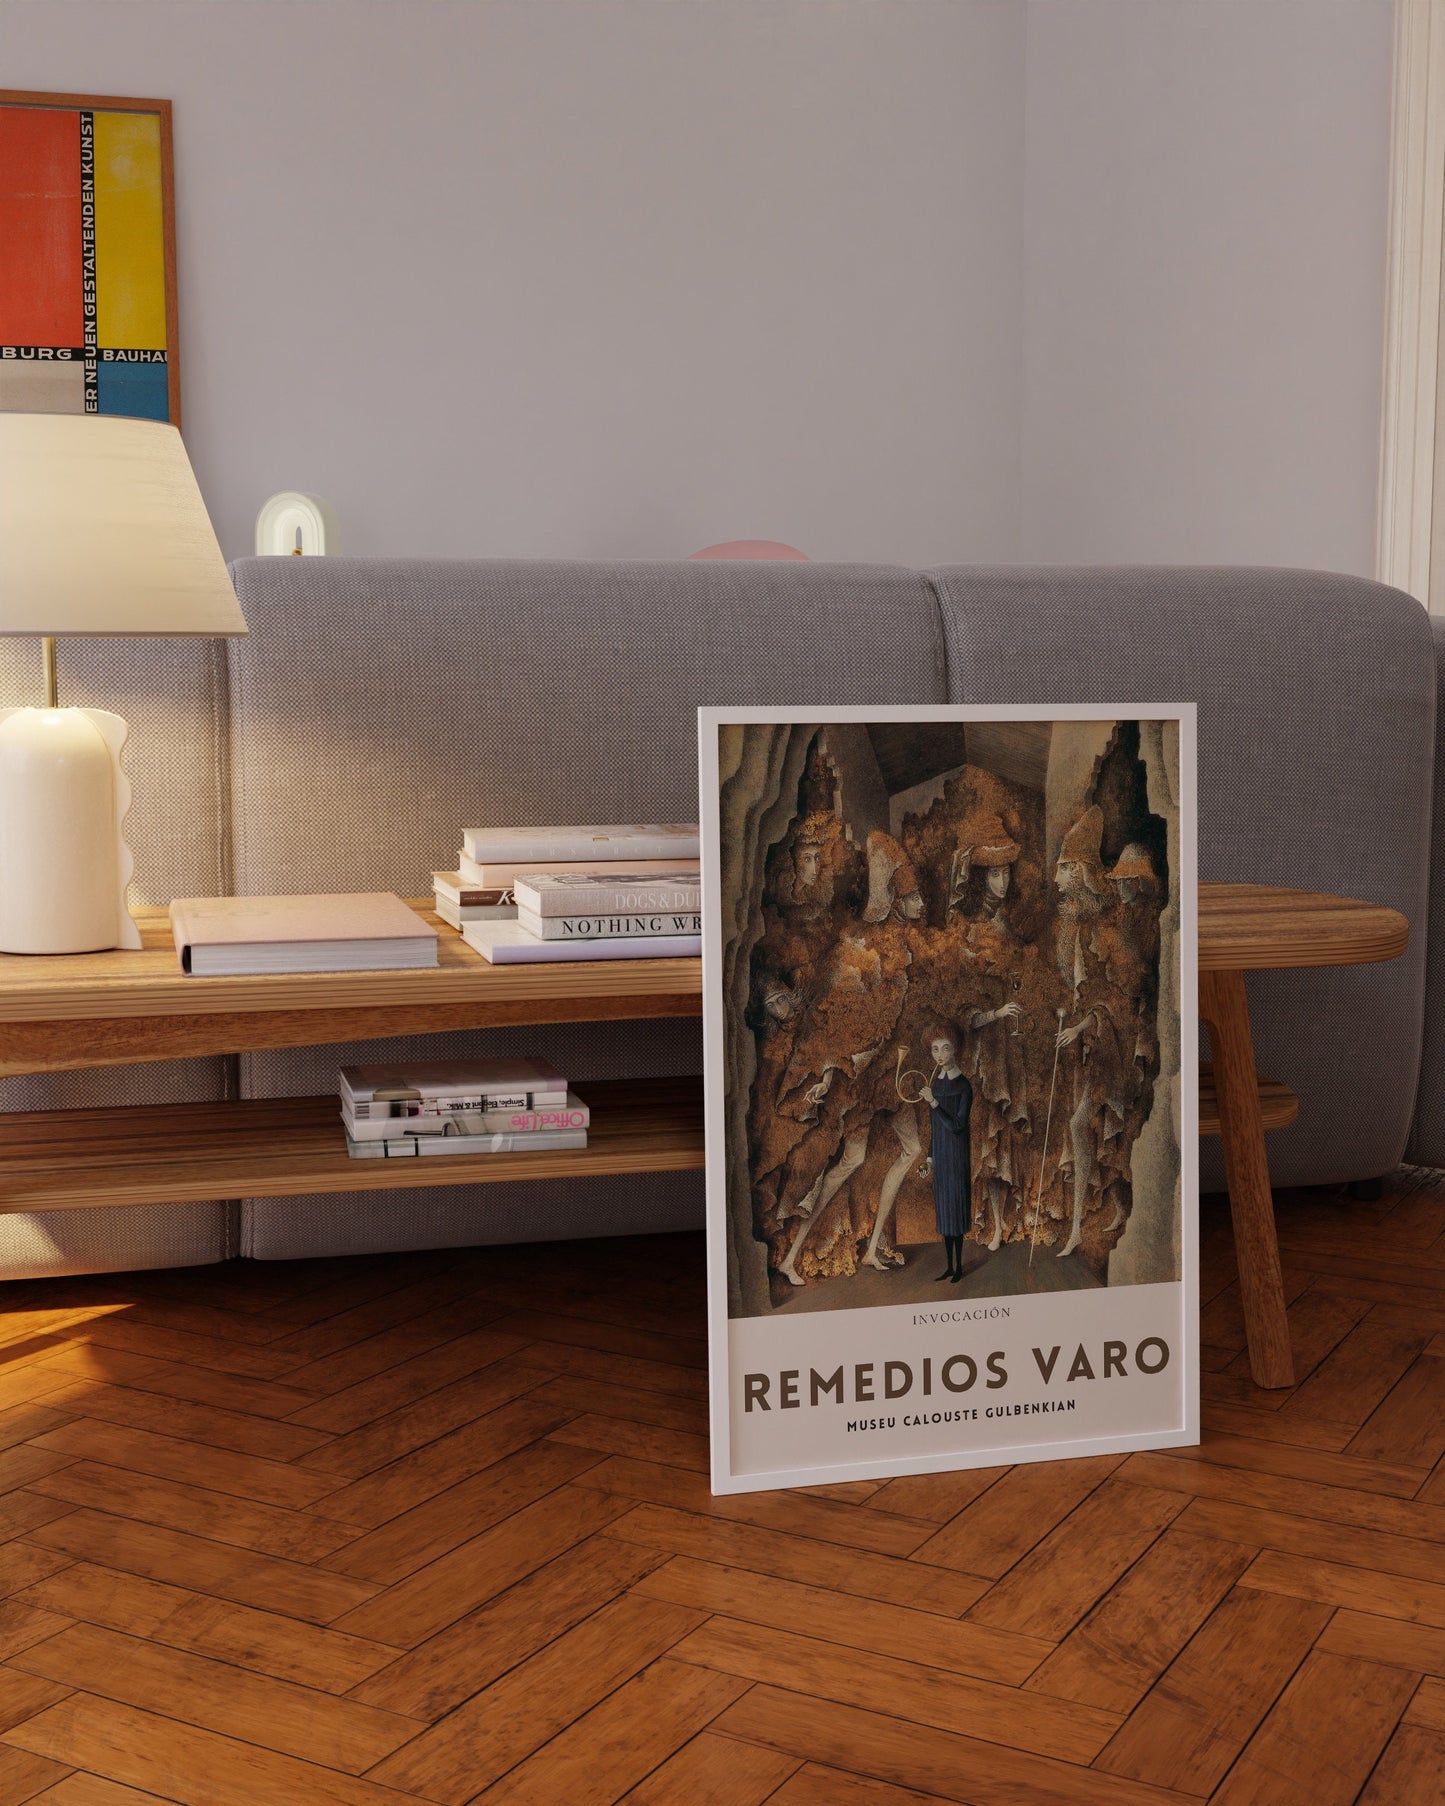 Remedios Varo The Invocation Fine Surreal Art Famous Mexican Iconic Painting Vintage Ready to hang Framed Home Office Decor Print Gift Idea